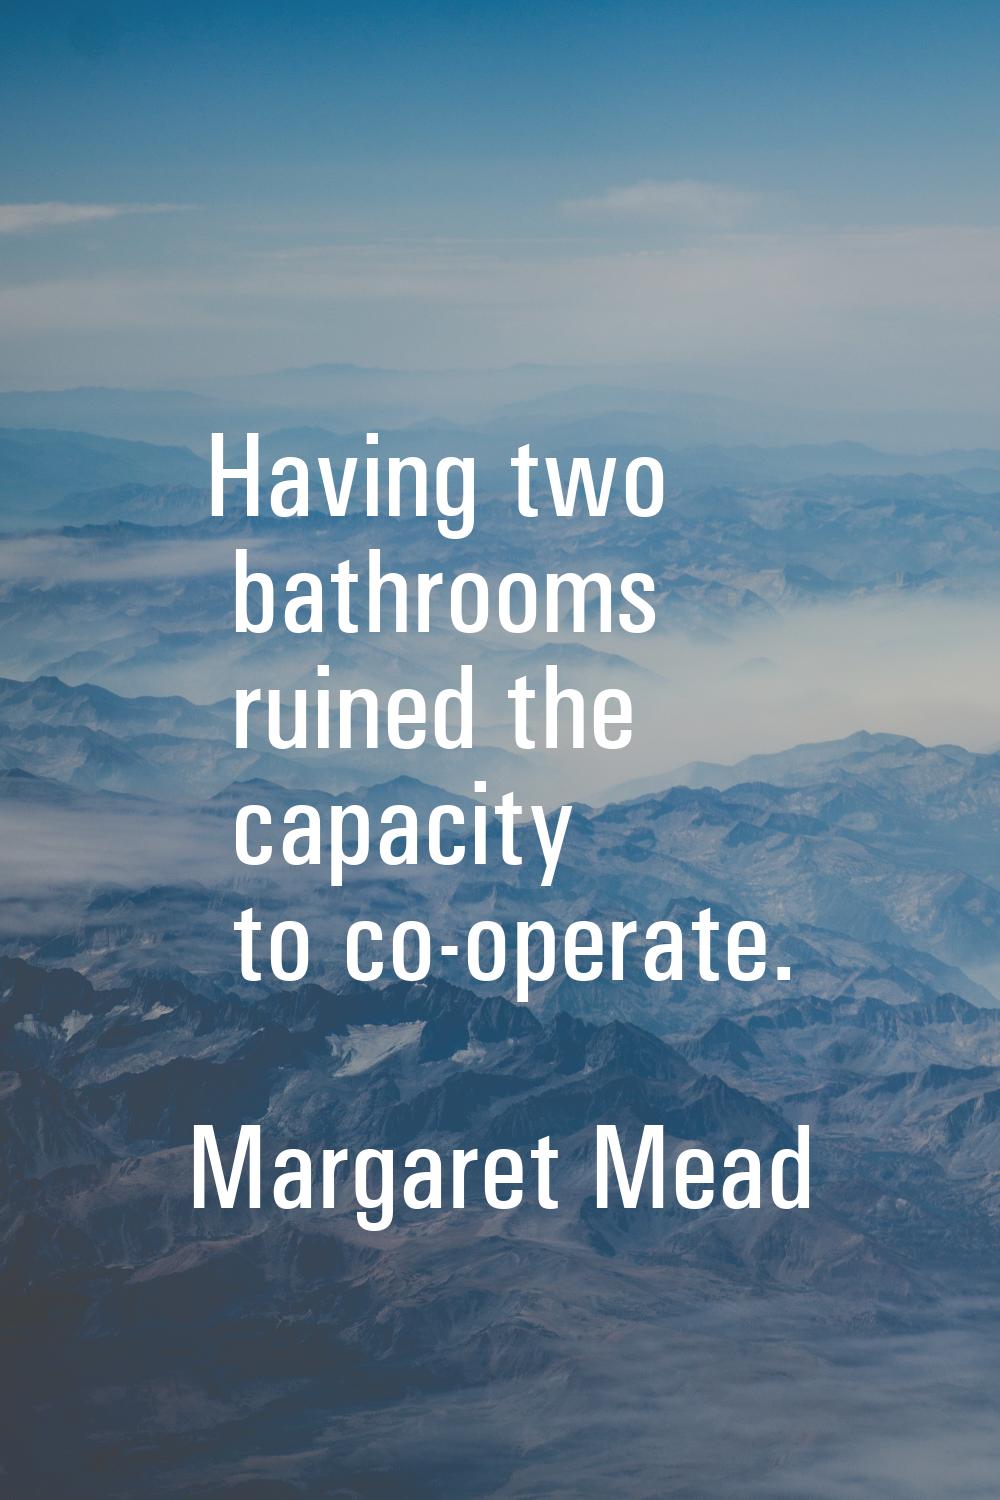 Having two bathrooms ruined the capacity to co-operate.